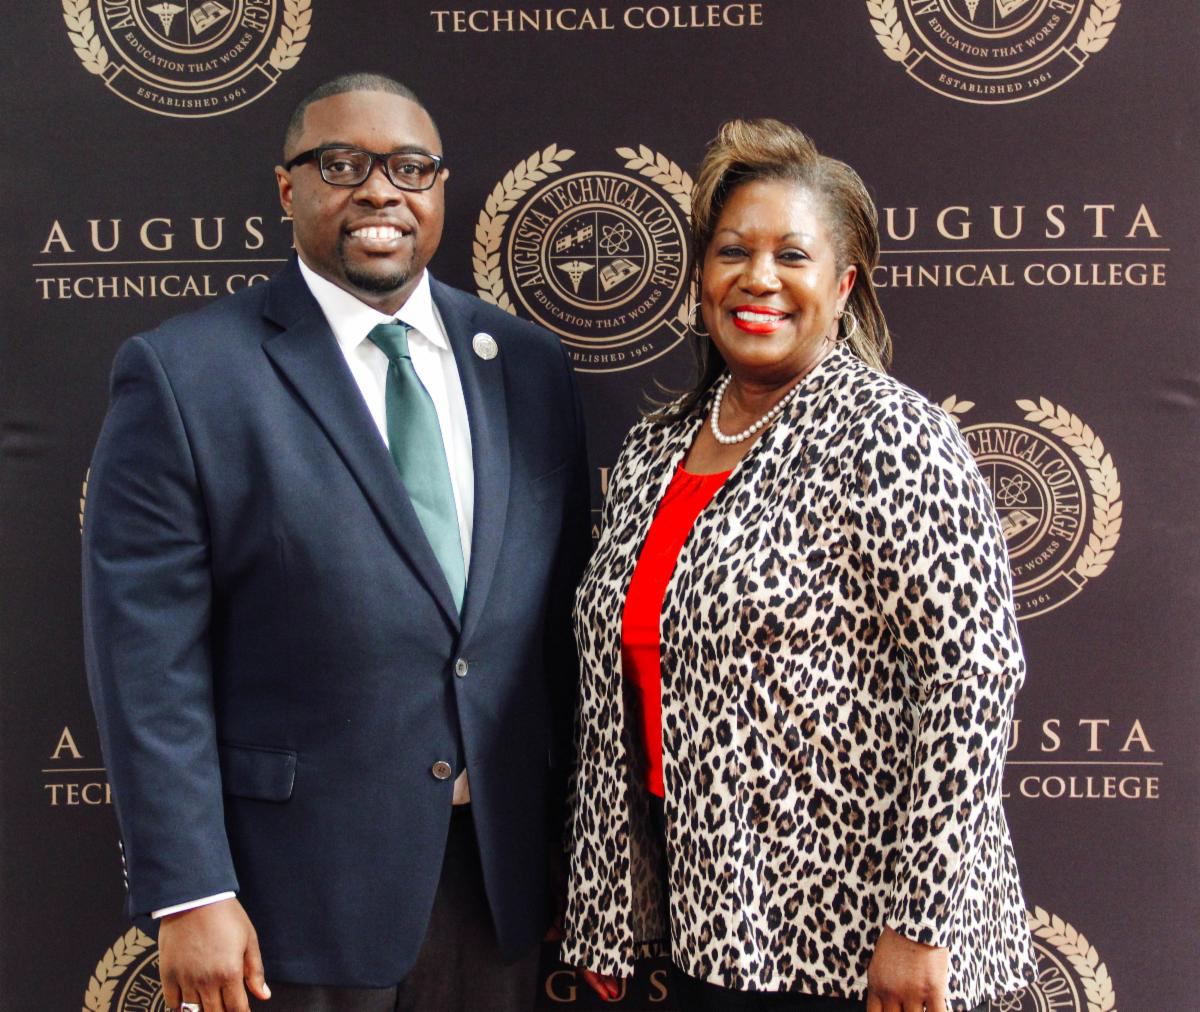 Photo: Smiling African American male wearing black glasses, blue suite, light blue/teal tie, white collared shirt, with silver lapel pin standing next to a smiling African American female wearing red shirt, pearl necklace, a leopard print cardigan, posing for a photo in front of a black background with the Augusta Tech seal.